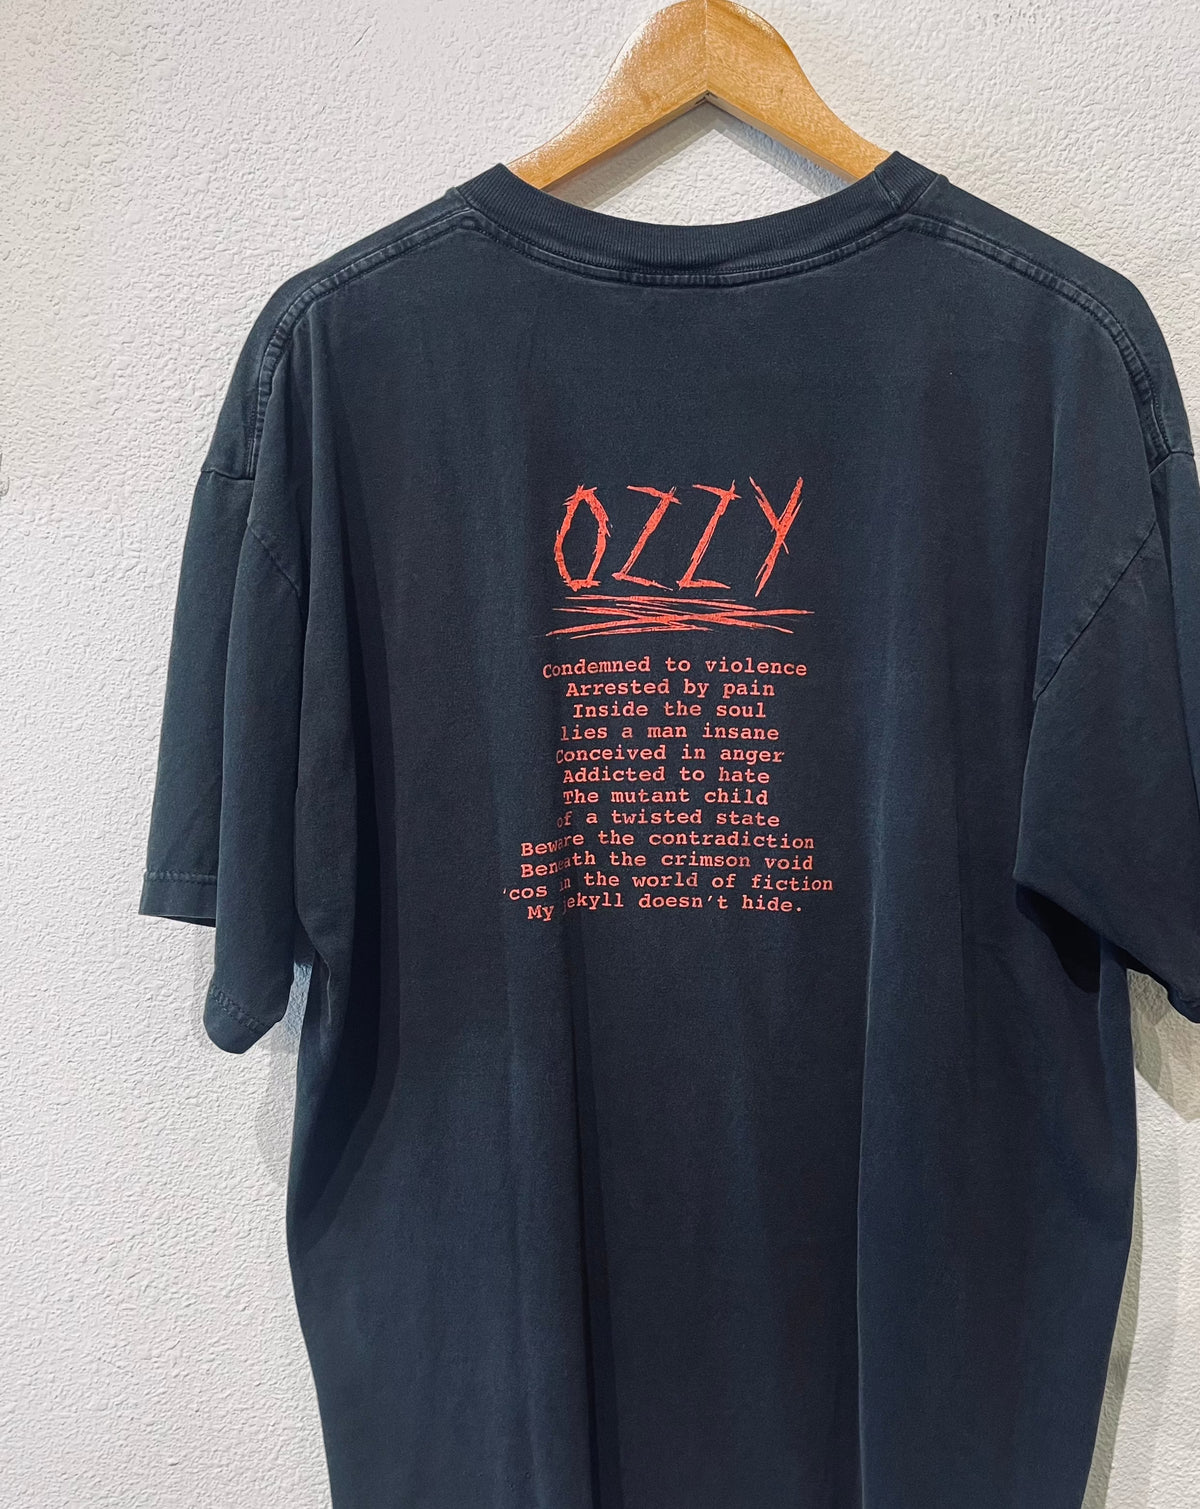 Ozzy Condemned to Violence Vintage Tee